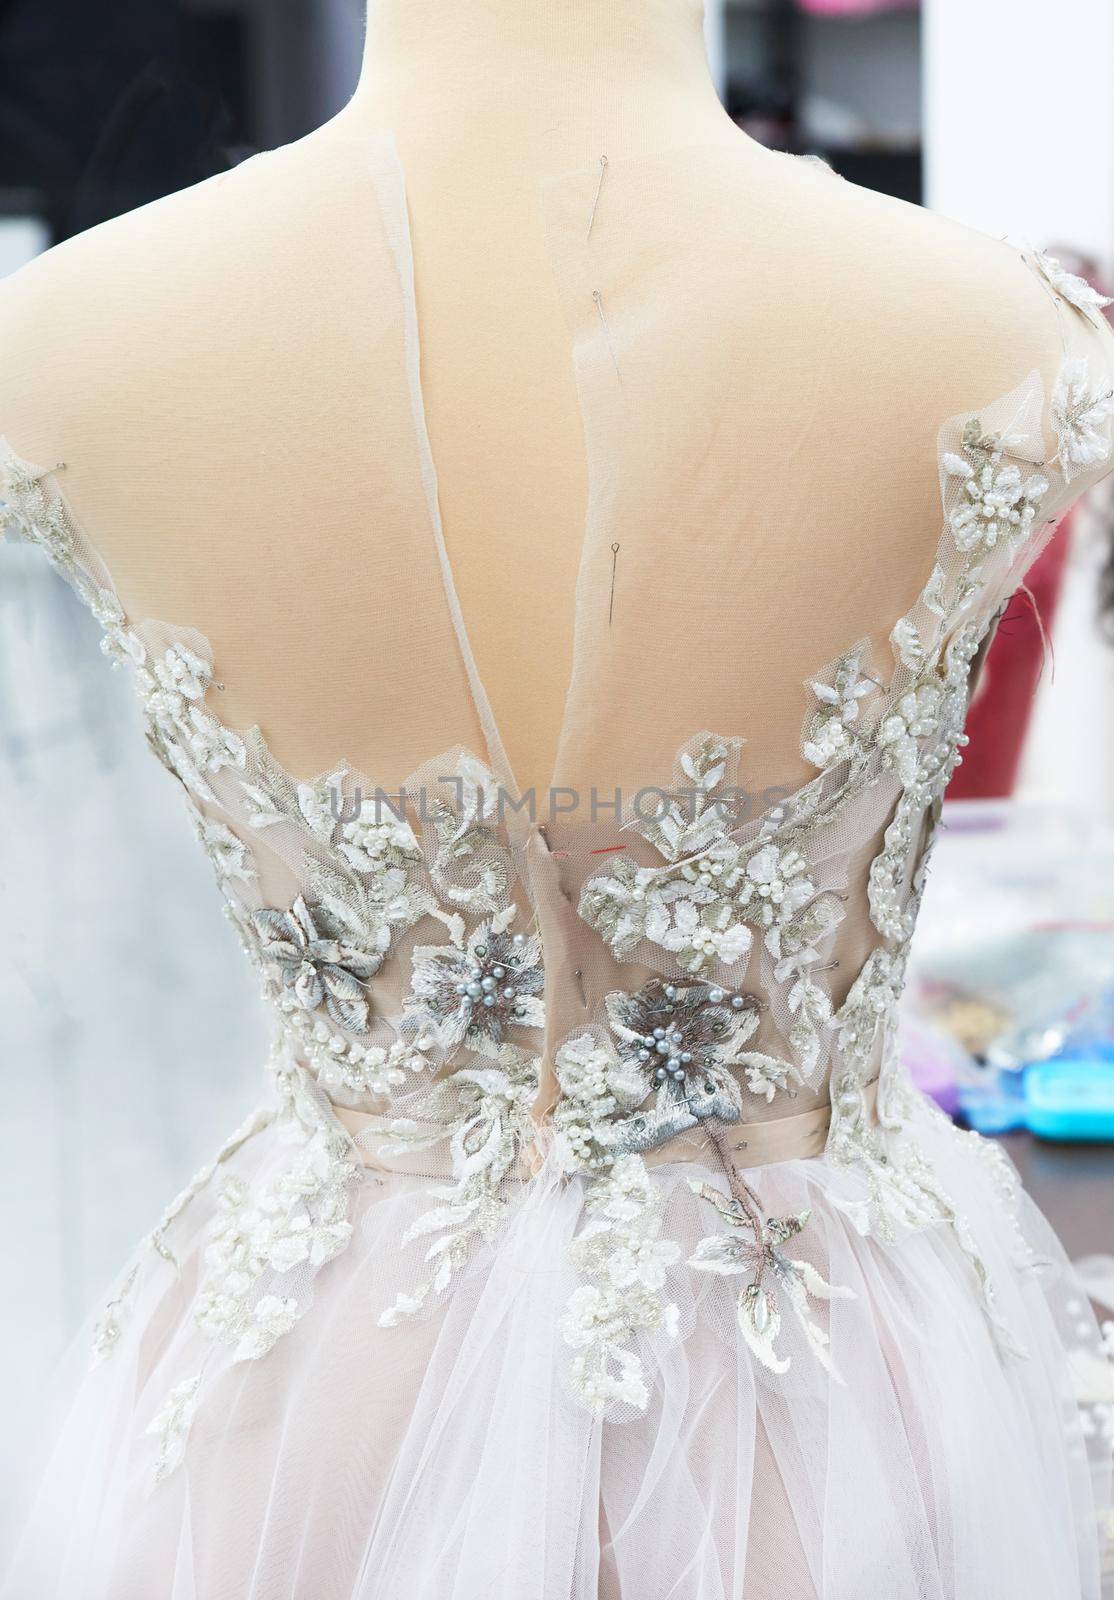 Detail of a weddings dress on a mannequin during sewing process by Mariakray